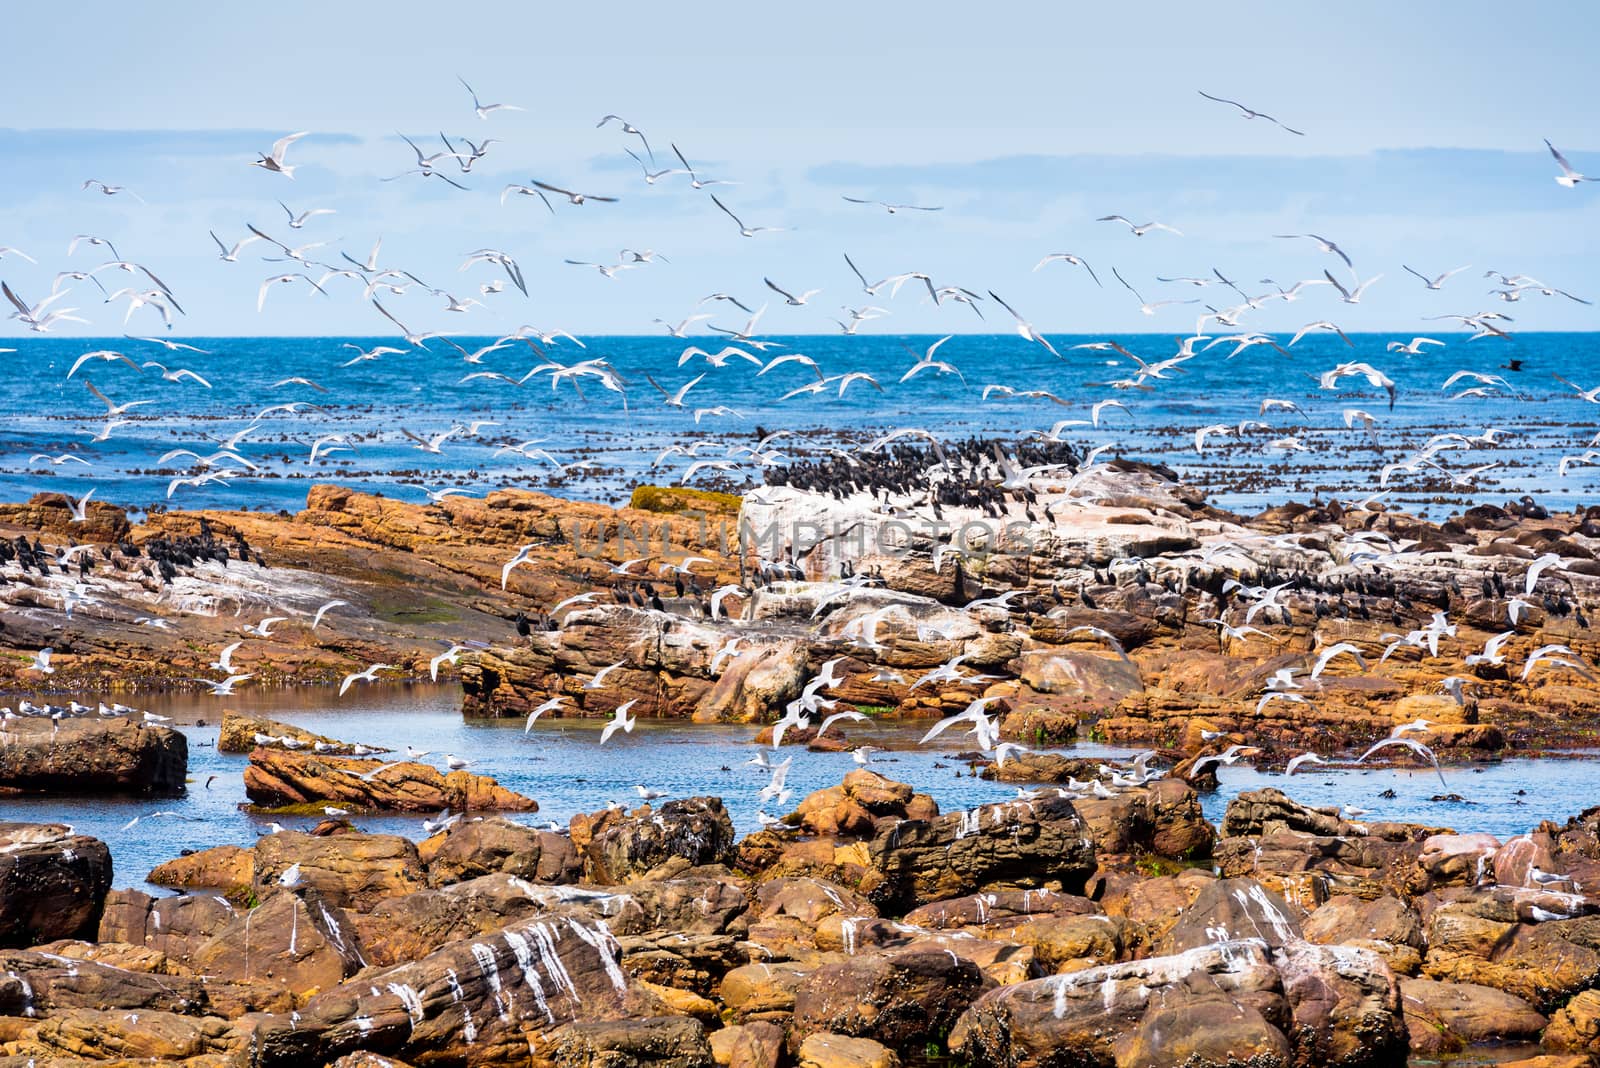 A flock of sea gulls takes to the sky over the Cape of Good Hope